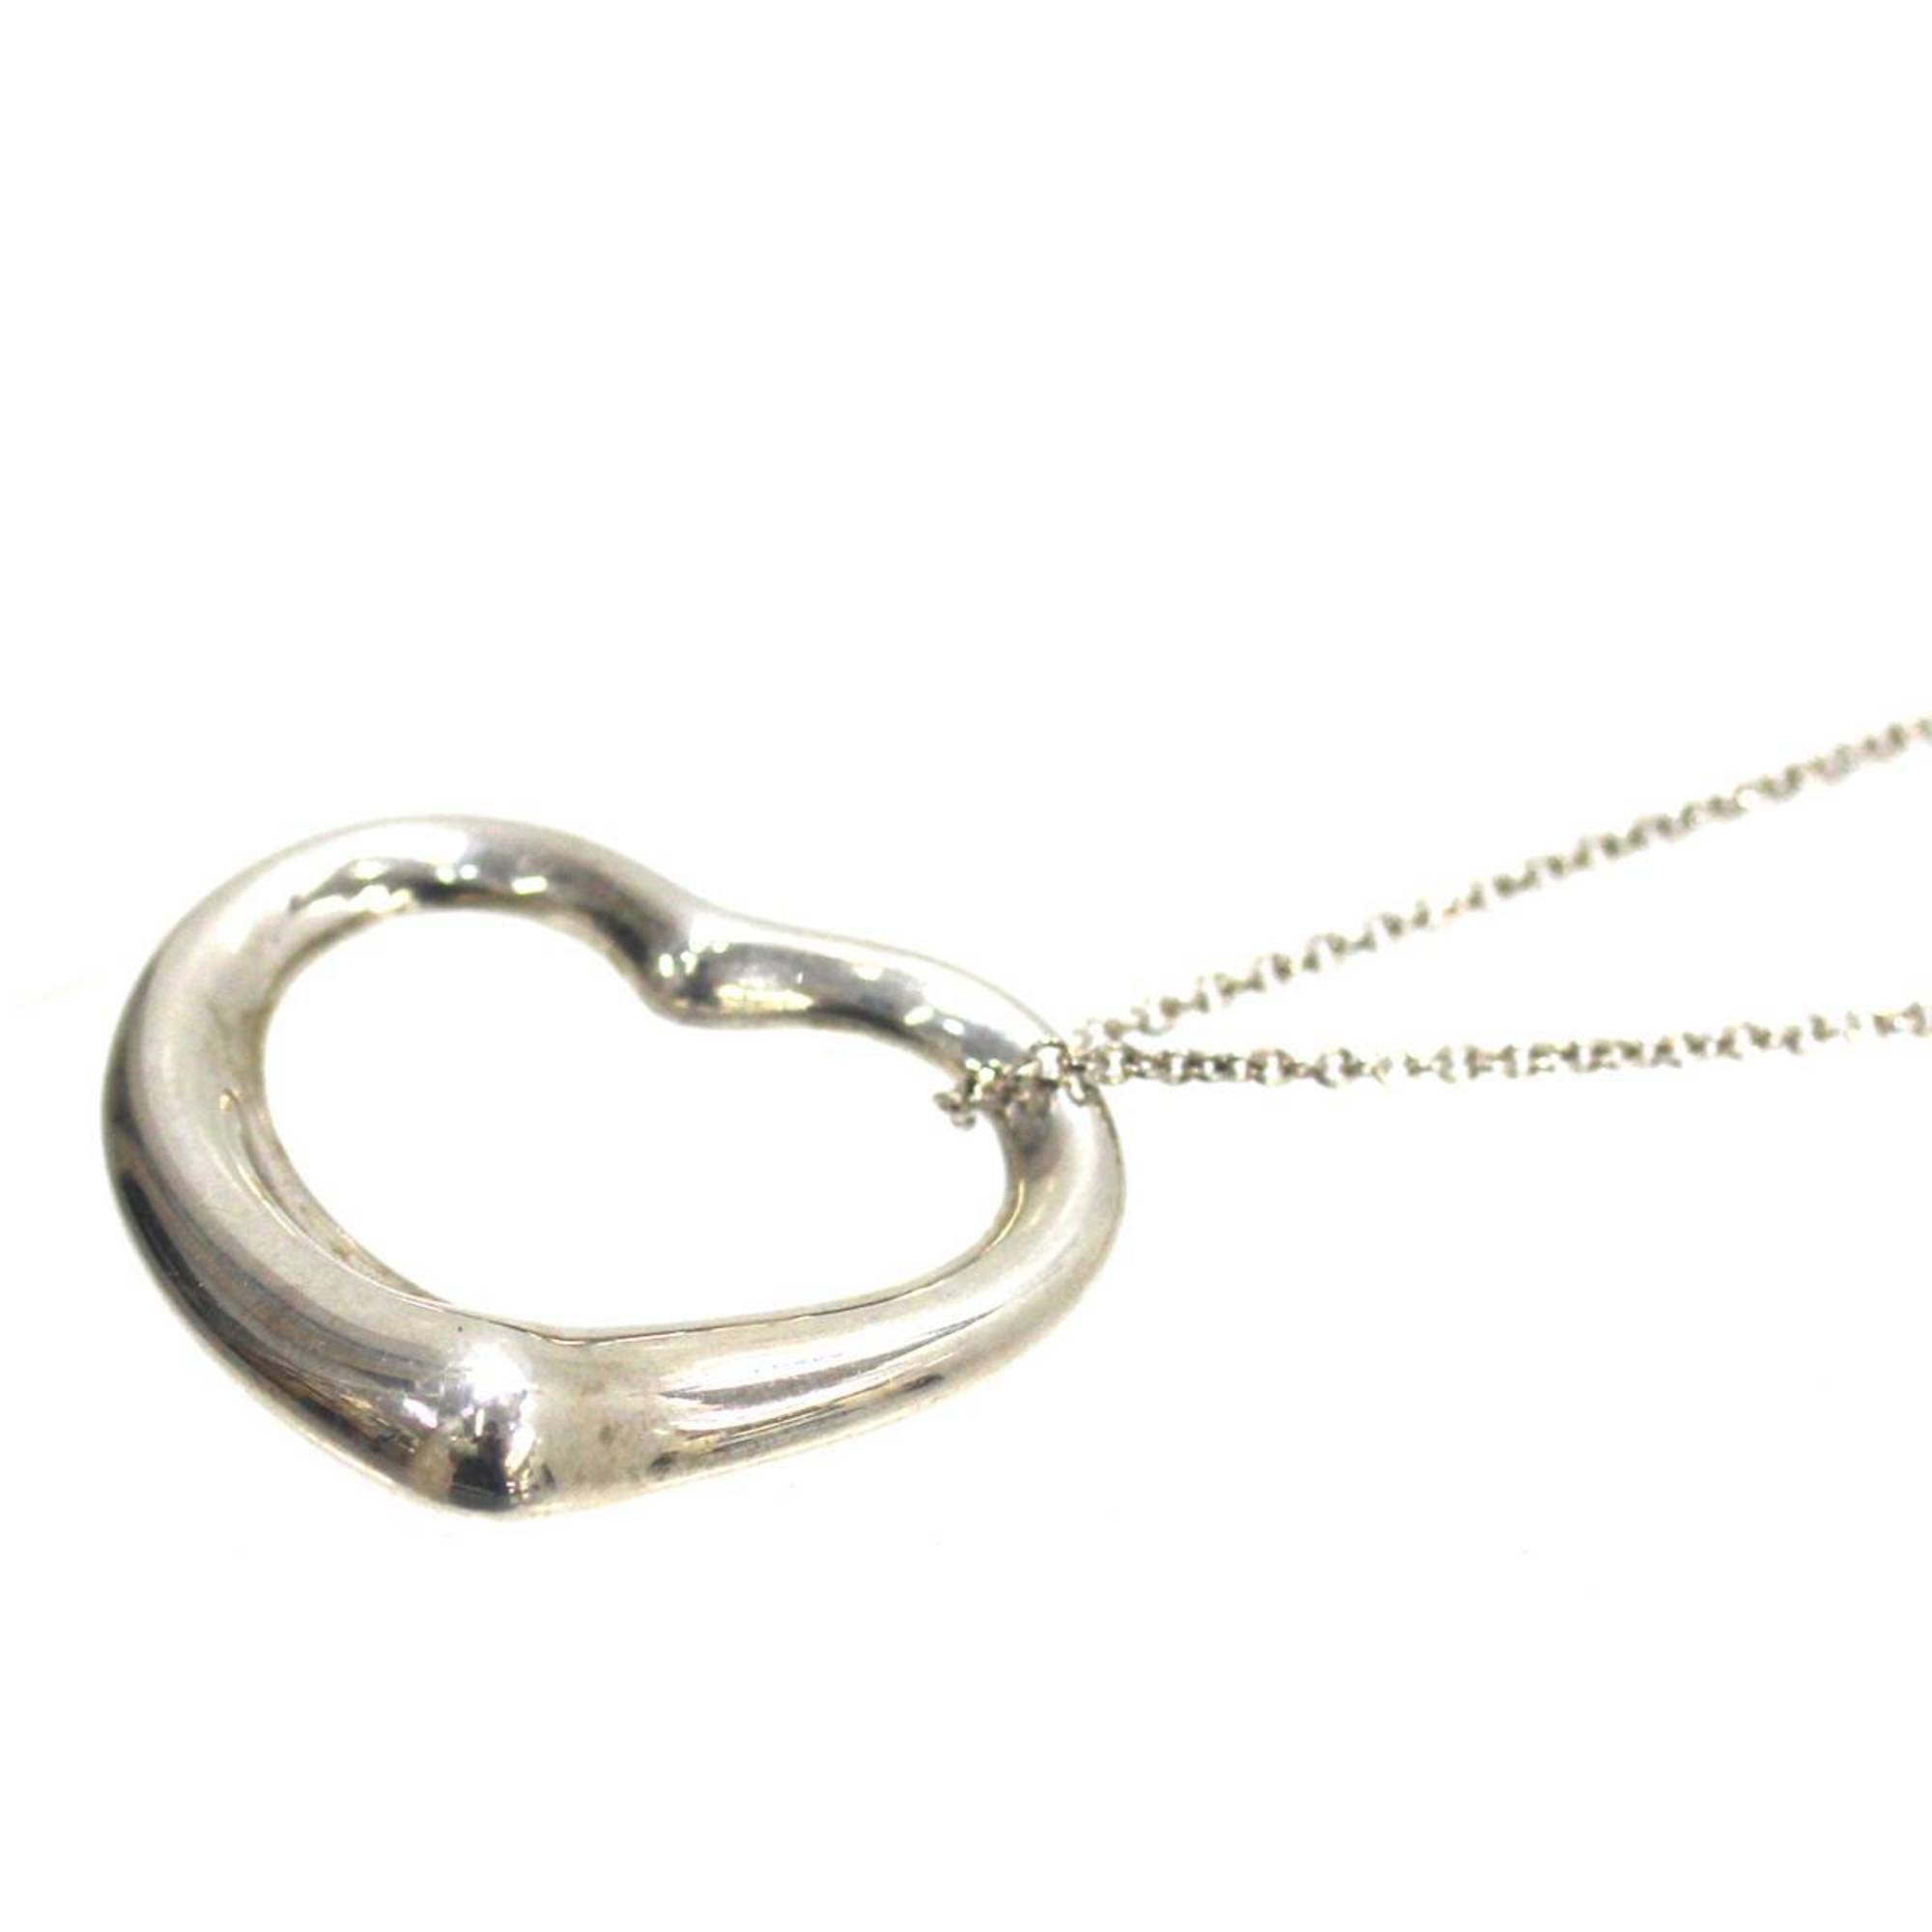 Tiffany&Co. Tiffany Large Heart Necklace Sv925 Silver 925 Neck circumference: Approx. 75cm